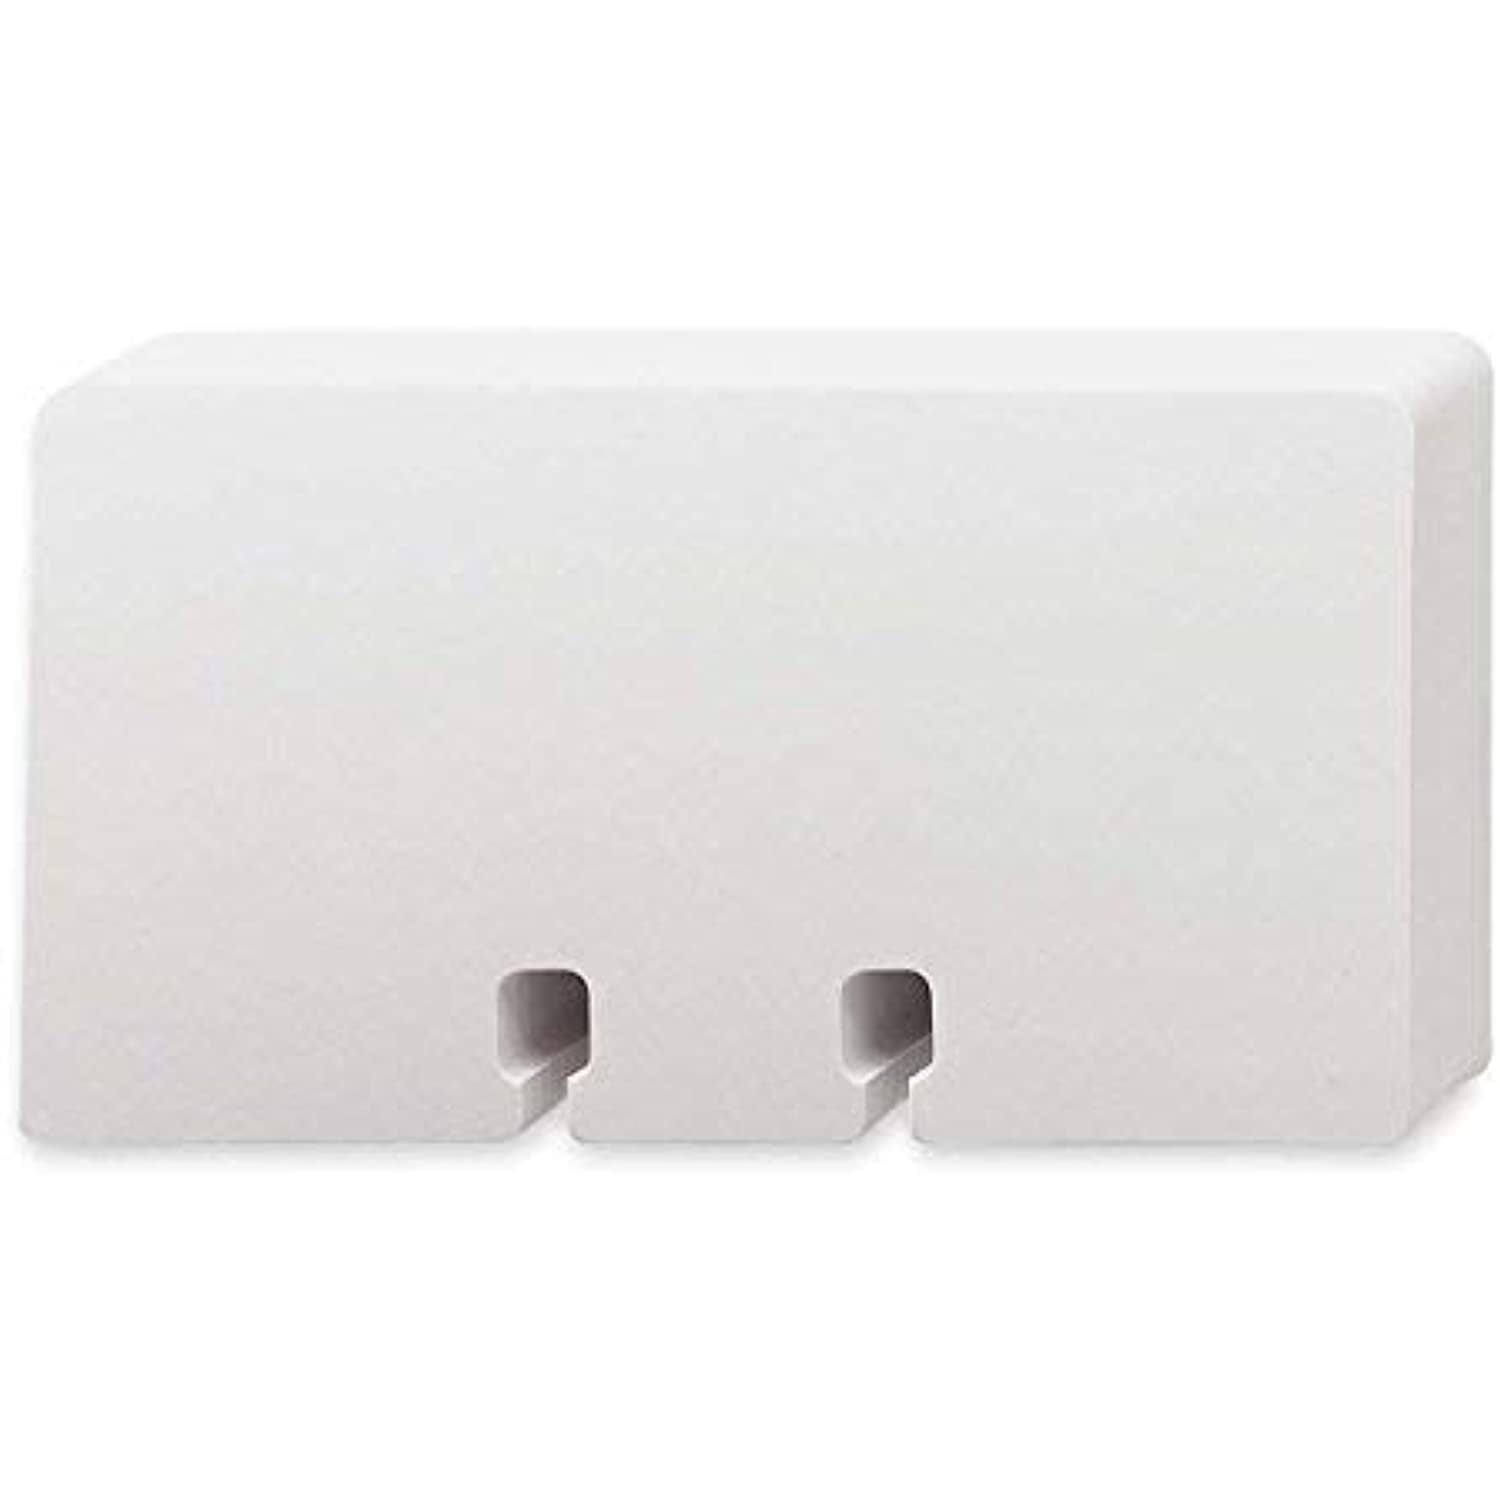 100 Cards/Pack Rolodex Petite Refill Cards 2 1/4 x 4 